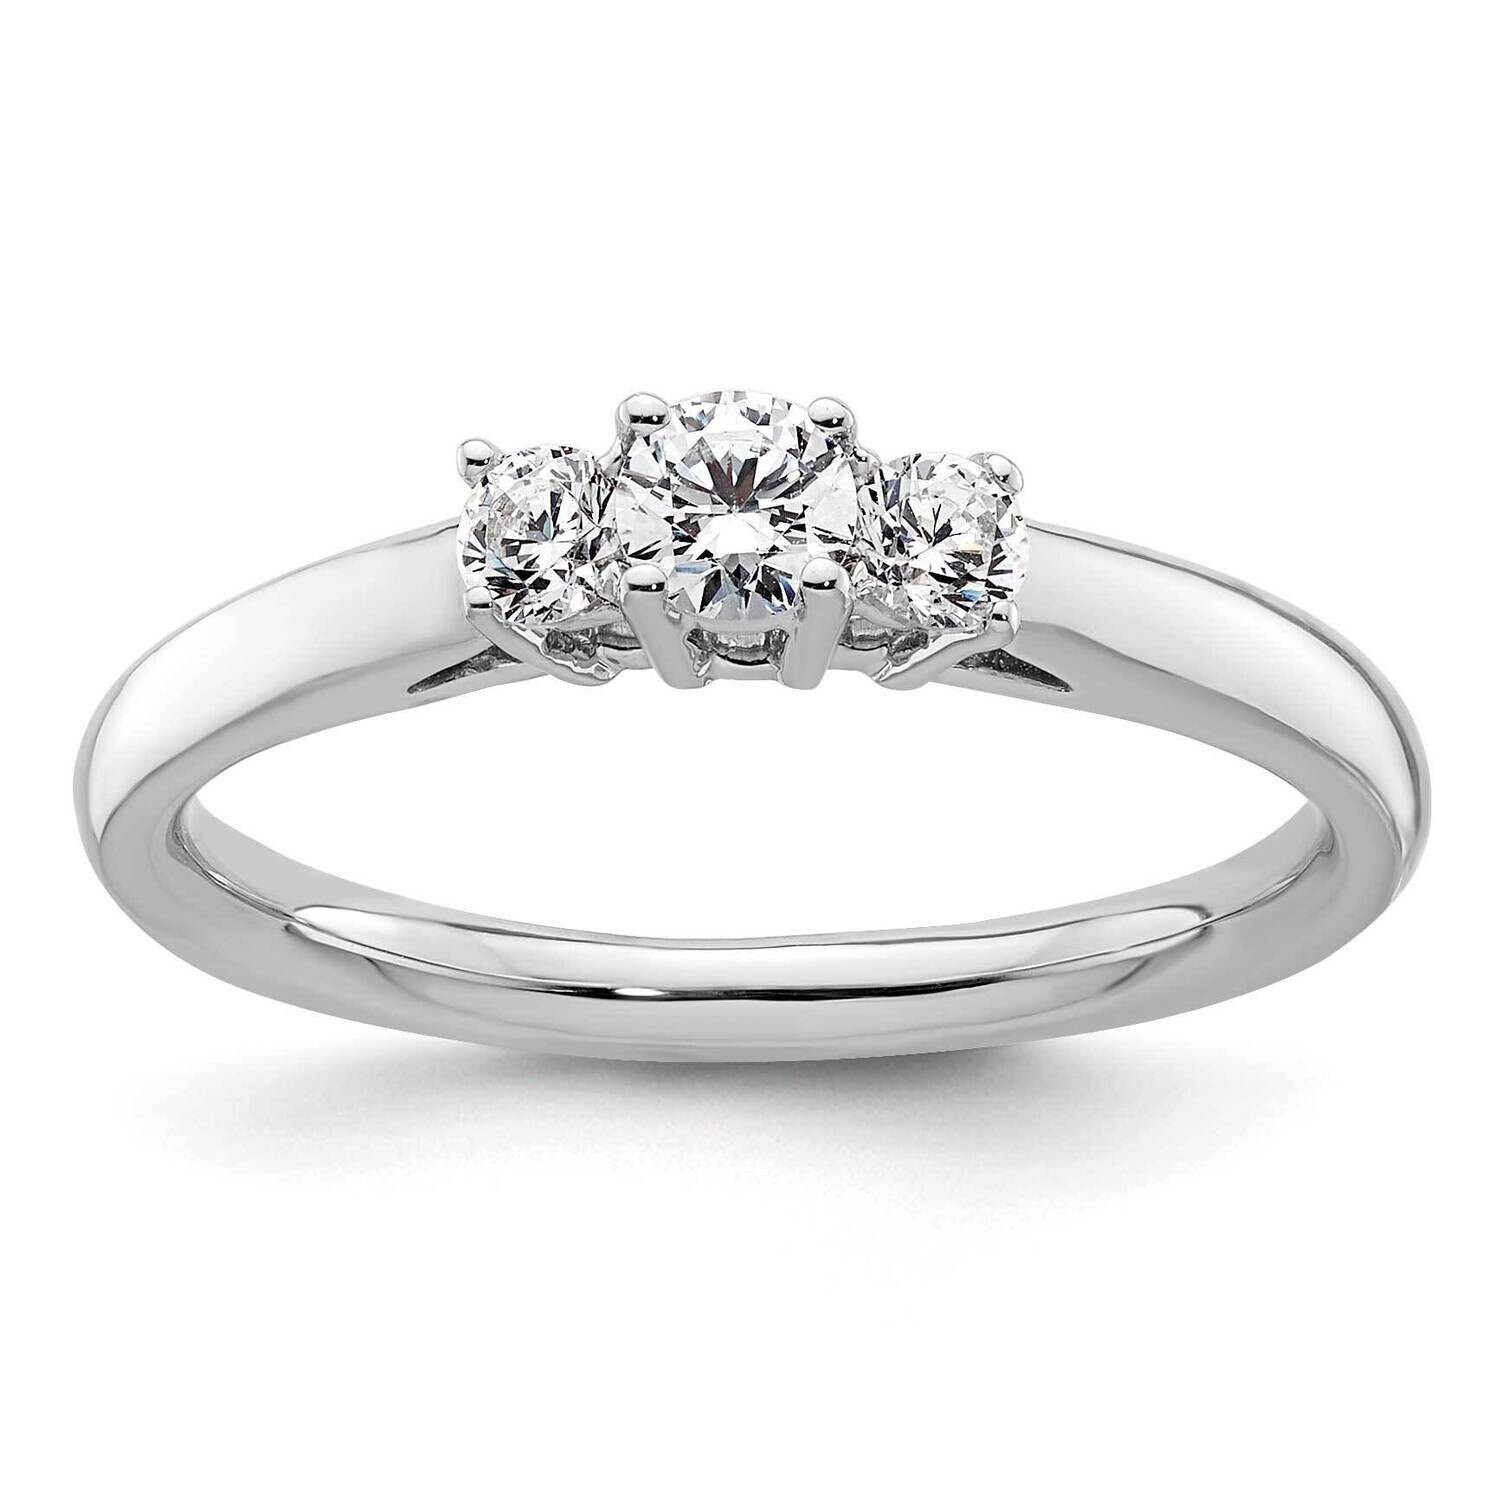 3-Stone Holds 1/6 Carat 3.5mm Round Center 2-2.8mm Round Sides Engagement Ring Mounting 14k White Gold RM2950E-017-CWAA